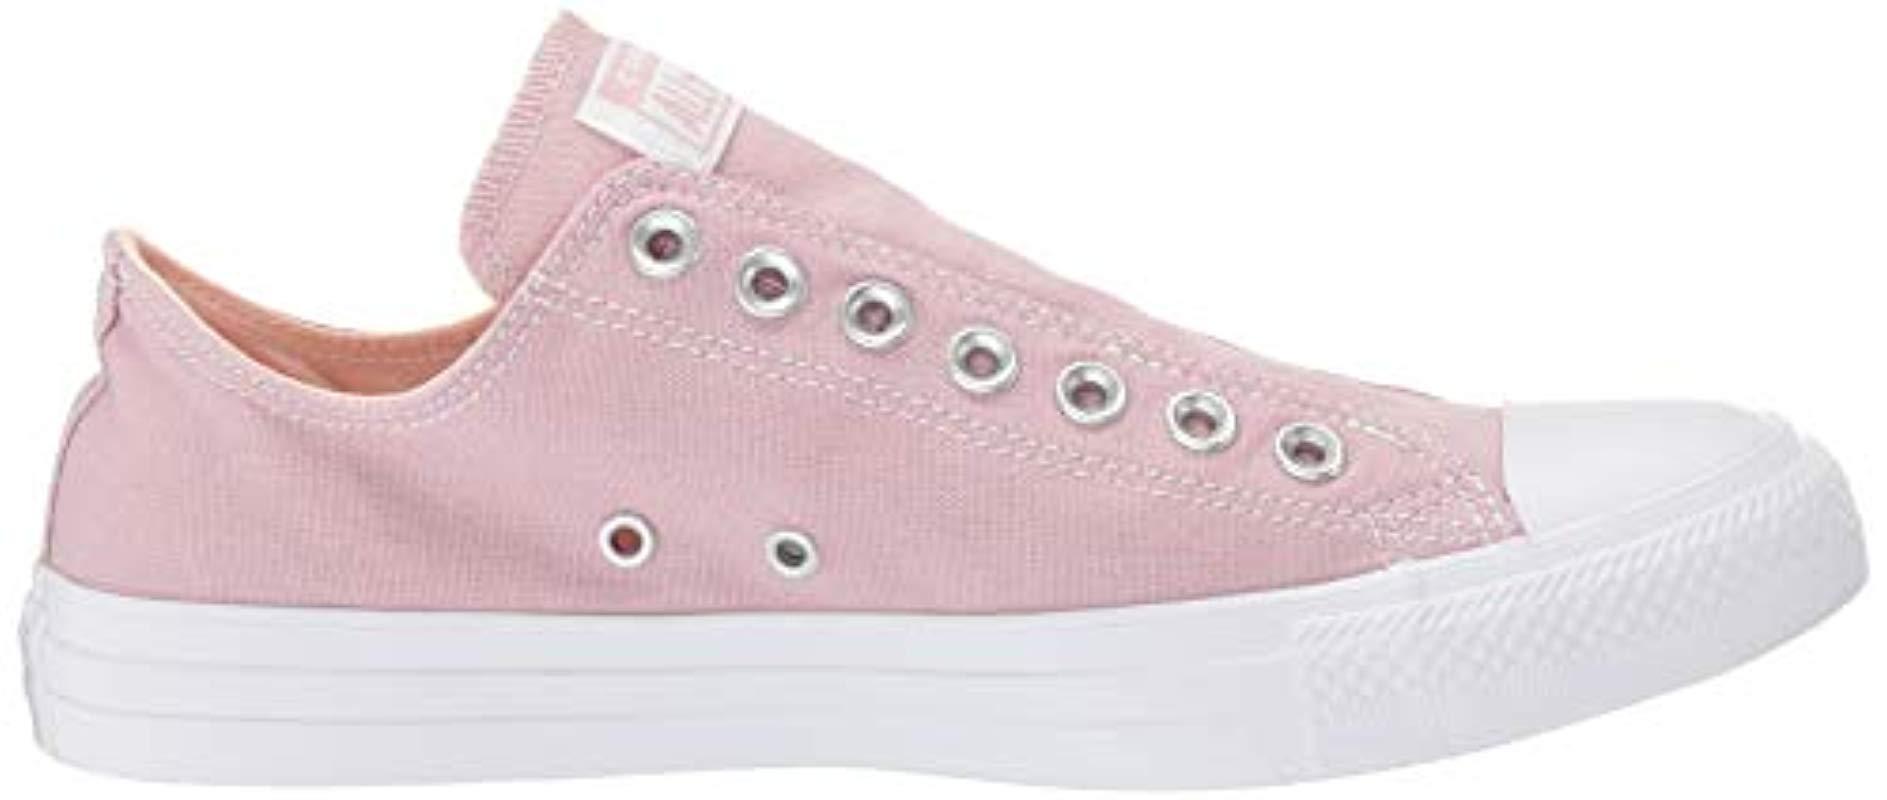 Converse Unisex Chuck Taylor All Star Slip On Sneaker in Pink - Lyst